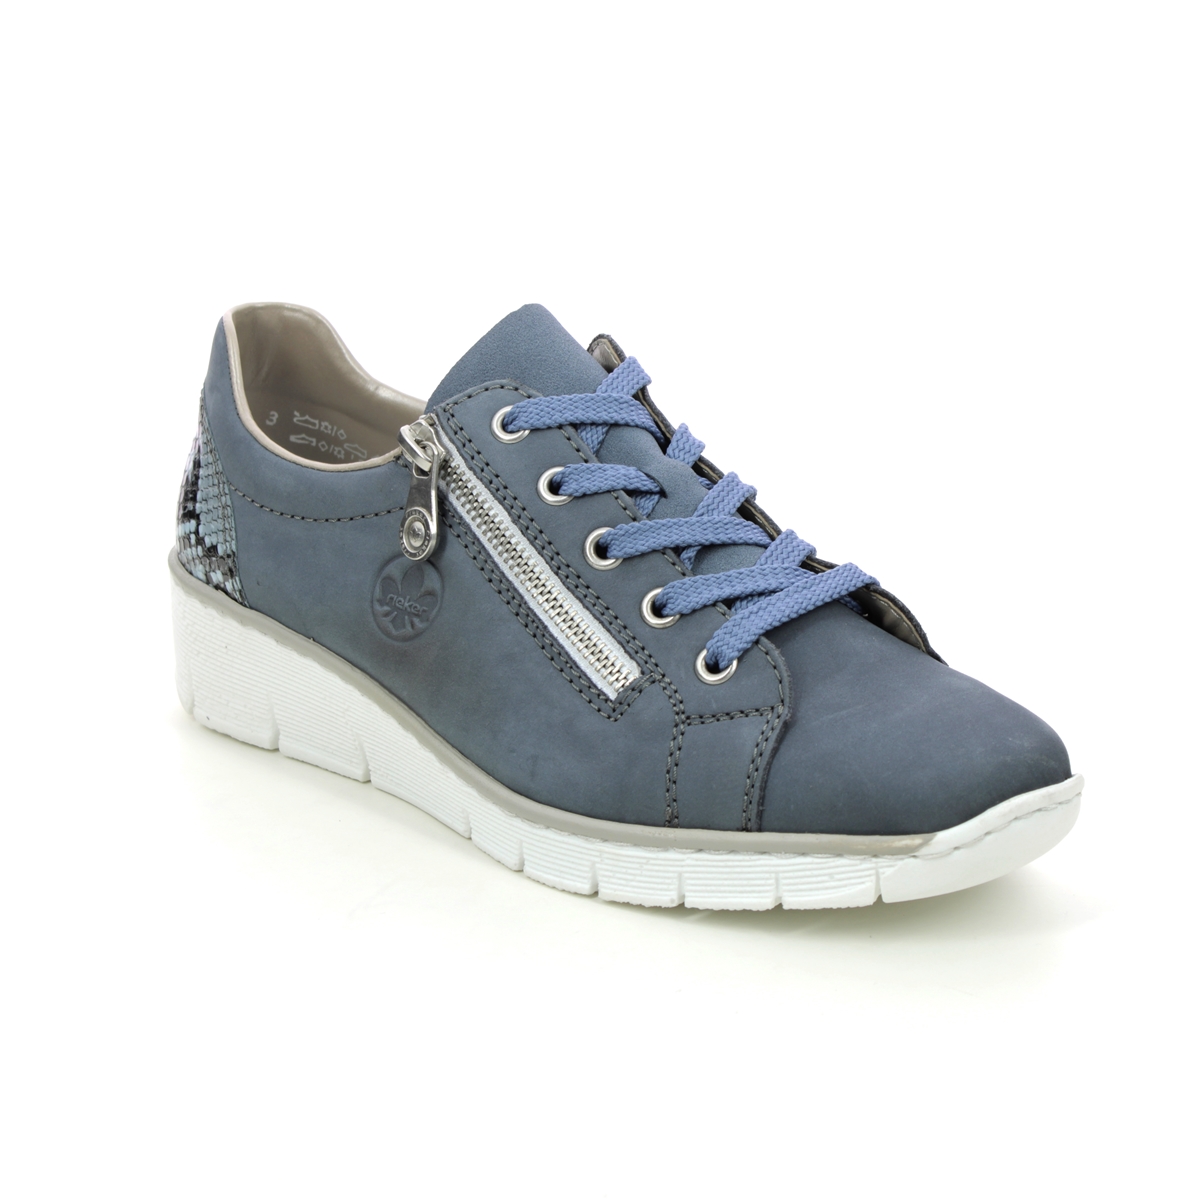 Rieker 53702-15 Denim leather Womens lacing shoes in a Plain Leather in Size 37